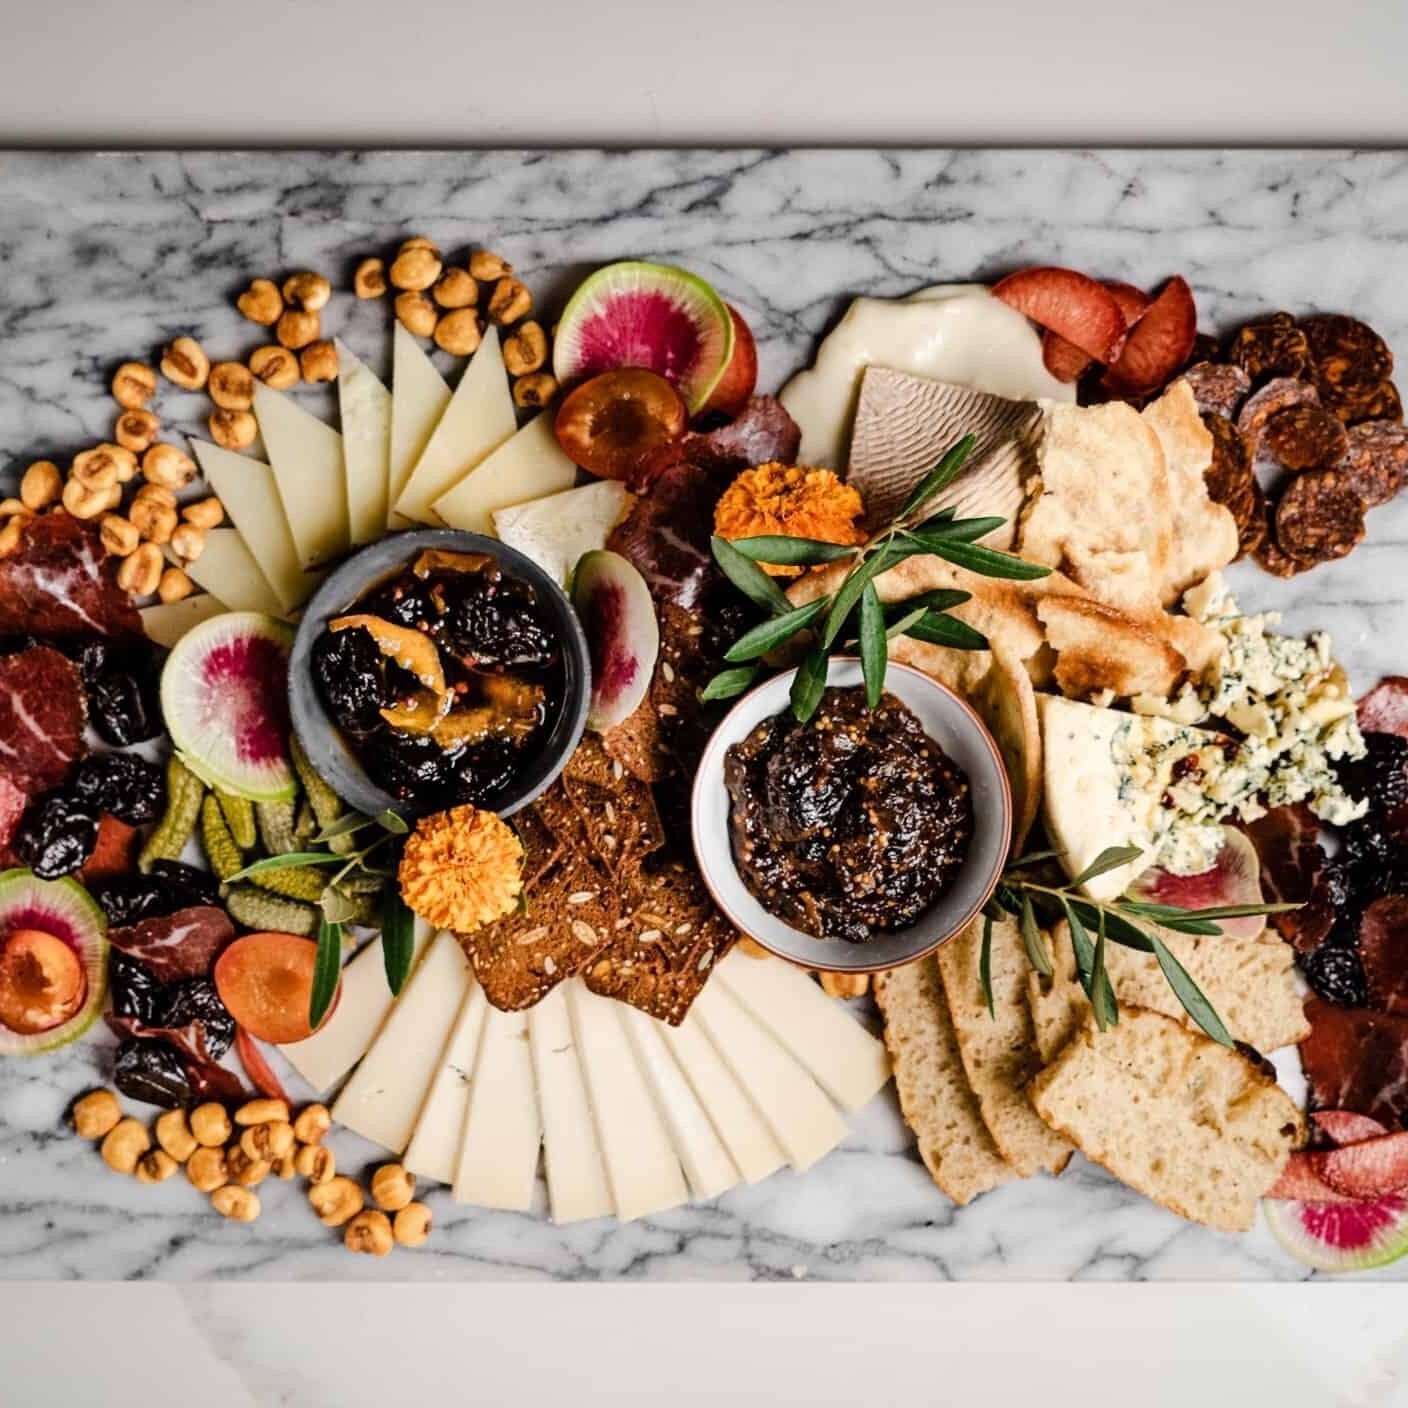 The Ultimate Cheese Board with Pink Peppercorn Prune Syrup, Prune Mostarda, cheeses fruit and corn nuts